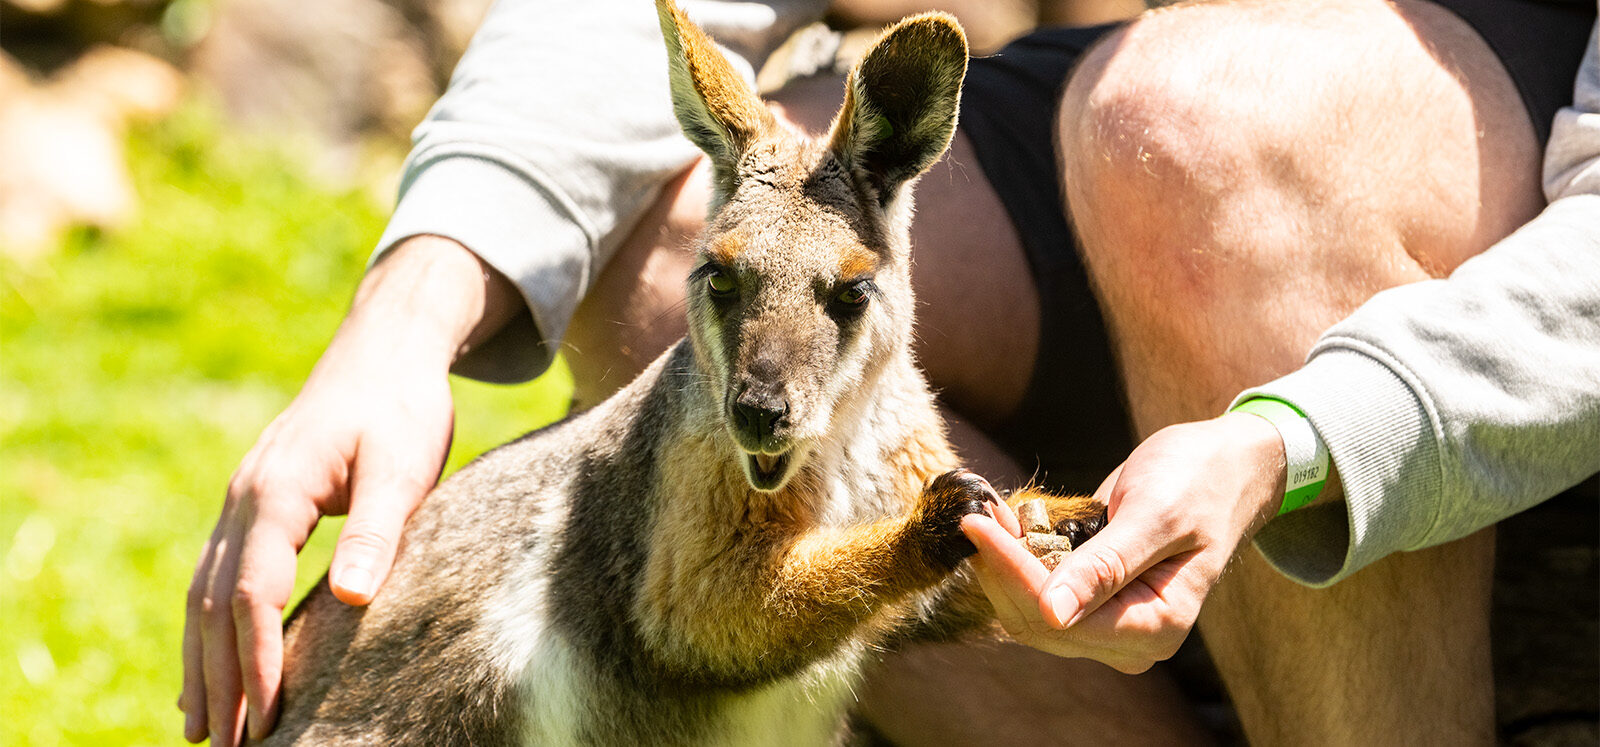 Yellow-footed Rock-wallaby with paws resting on human's hand who is crouching down. Wallaby is munching on pellets from the human's hands